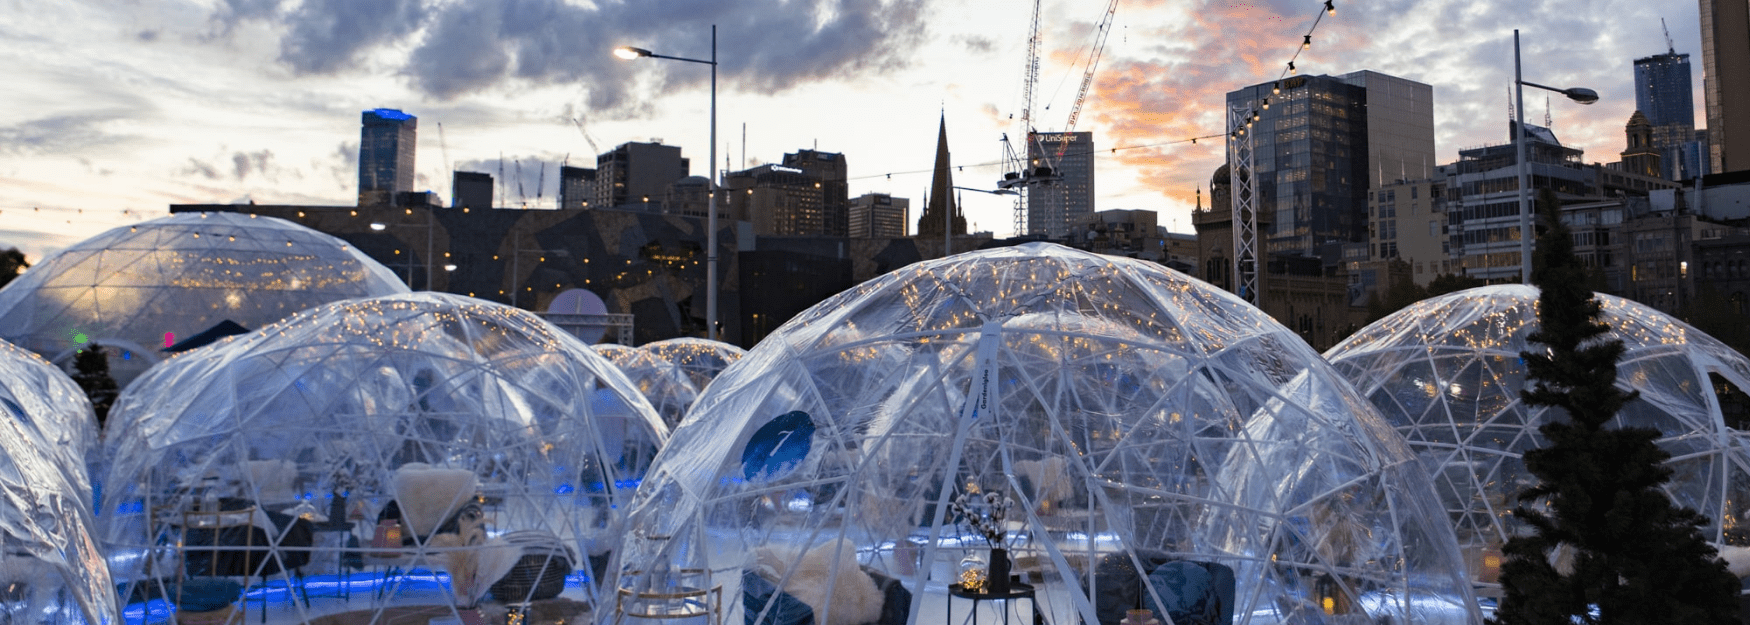 Pop Up Winter Village atop Fed Square